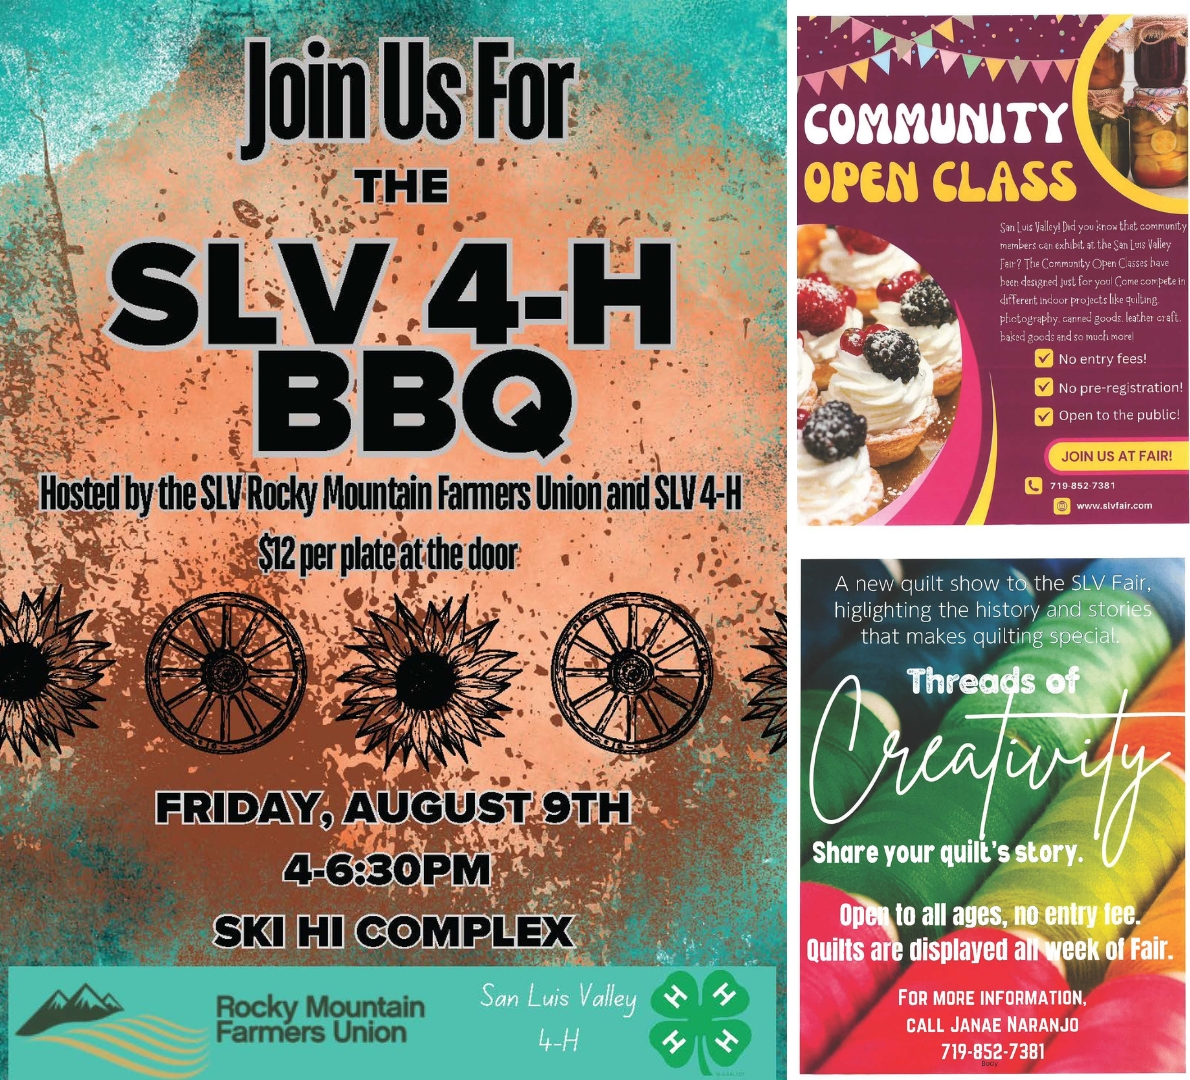 A vibrant poster for the ‘SLV 4-H BBQ’ event. The background features splashes of orange, yellow, and green colors, resembling a watercolor effect. In the center, stylized circular symbols depict sunflowers or ferris wheels. The top of the poster reads ‘Join Us For The SLV 4-H BBQ,’ hosted by the SLV Rocky Mountain Farmers Union. The event takes place on Friday, August 9th, from 4-6:30 PM at the Ski Hi Complex in San Luis Valley. Quilts are also highlighted, inviting participants to share their stories.